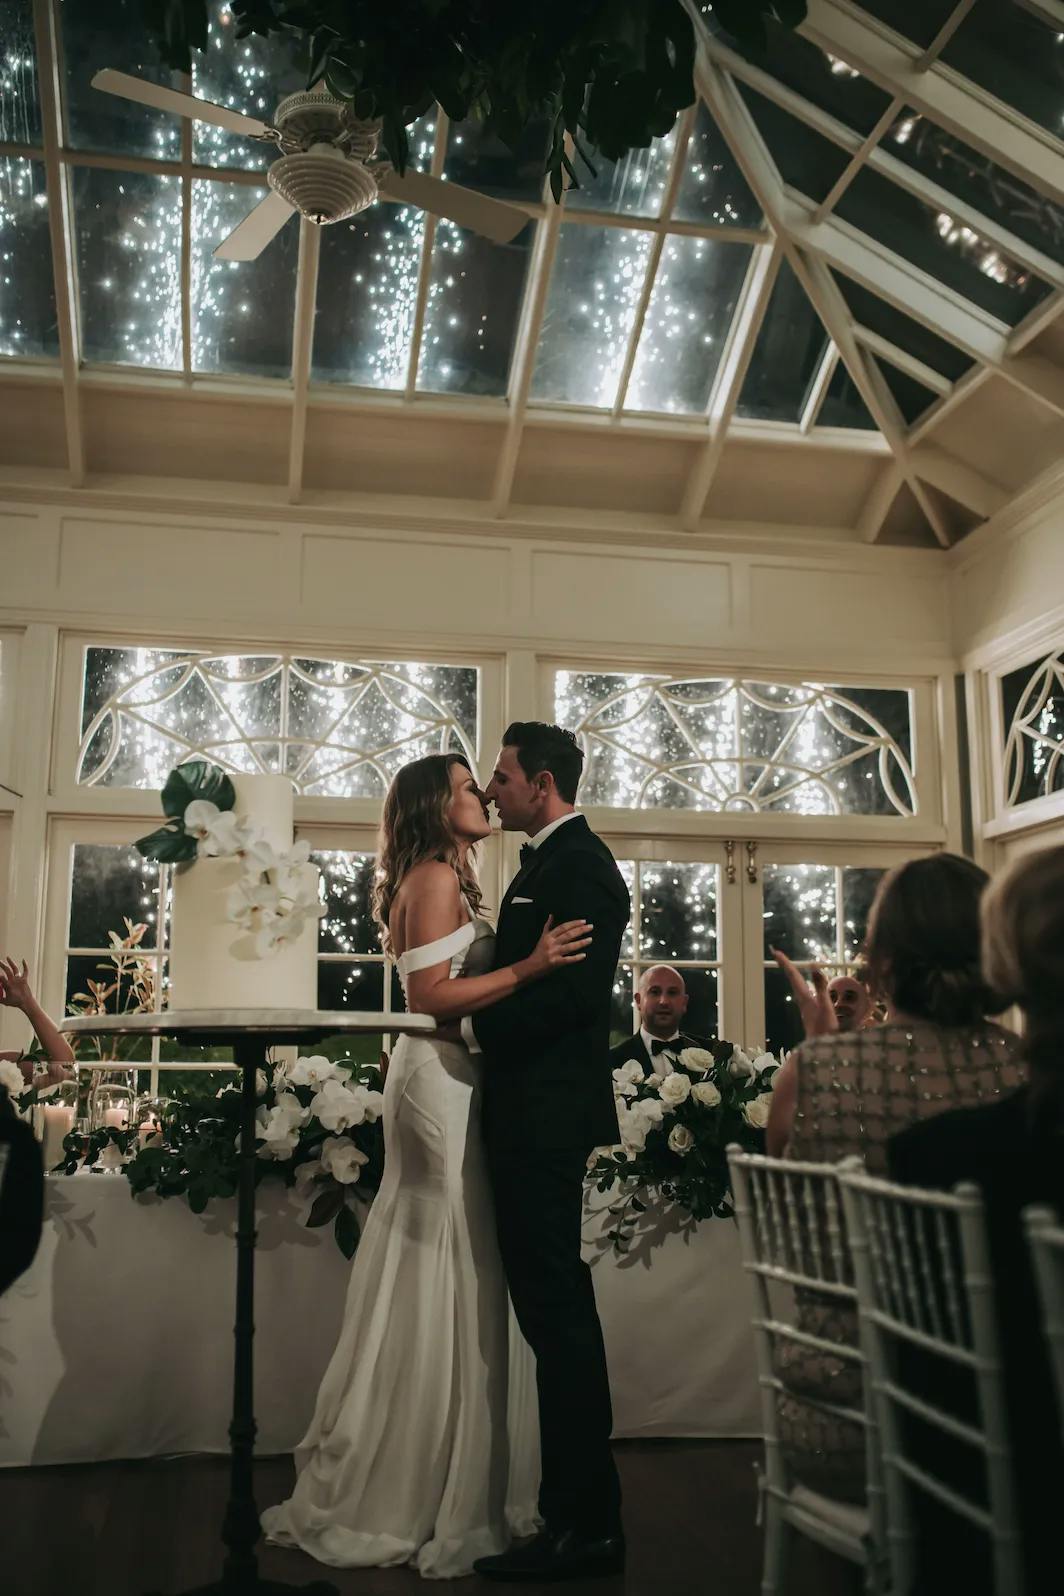 A bride and groom share a kiss in a romantic setting with fireworks lighting up the night sky through a large glass window behind them. They are surrounded by white floral arrangements and seated guests inside a beautifully decorated venue.